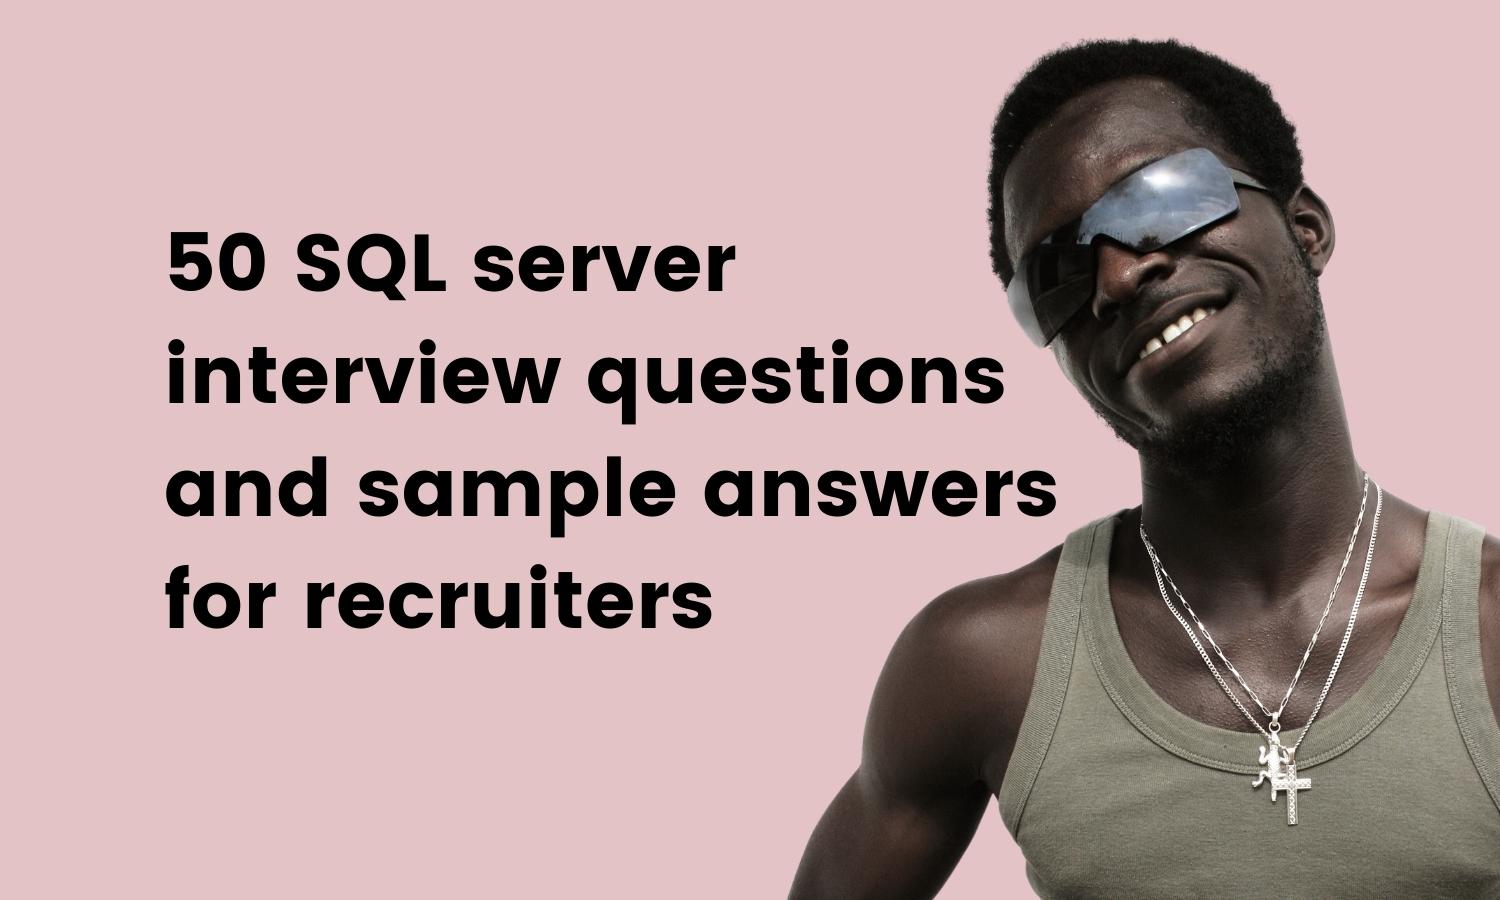 50 SQL server interview questions for recruiters feature image